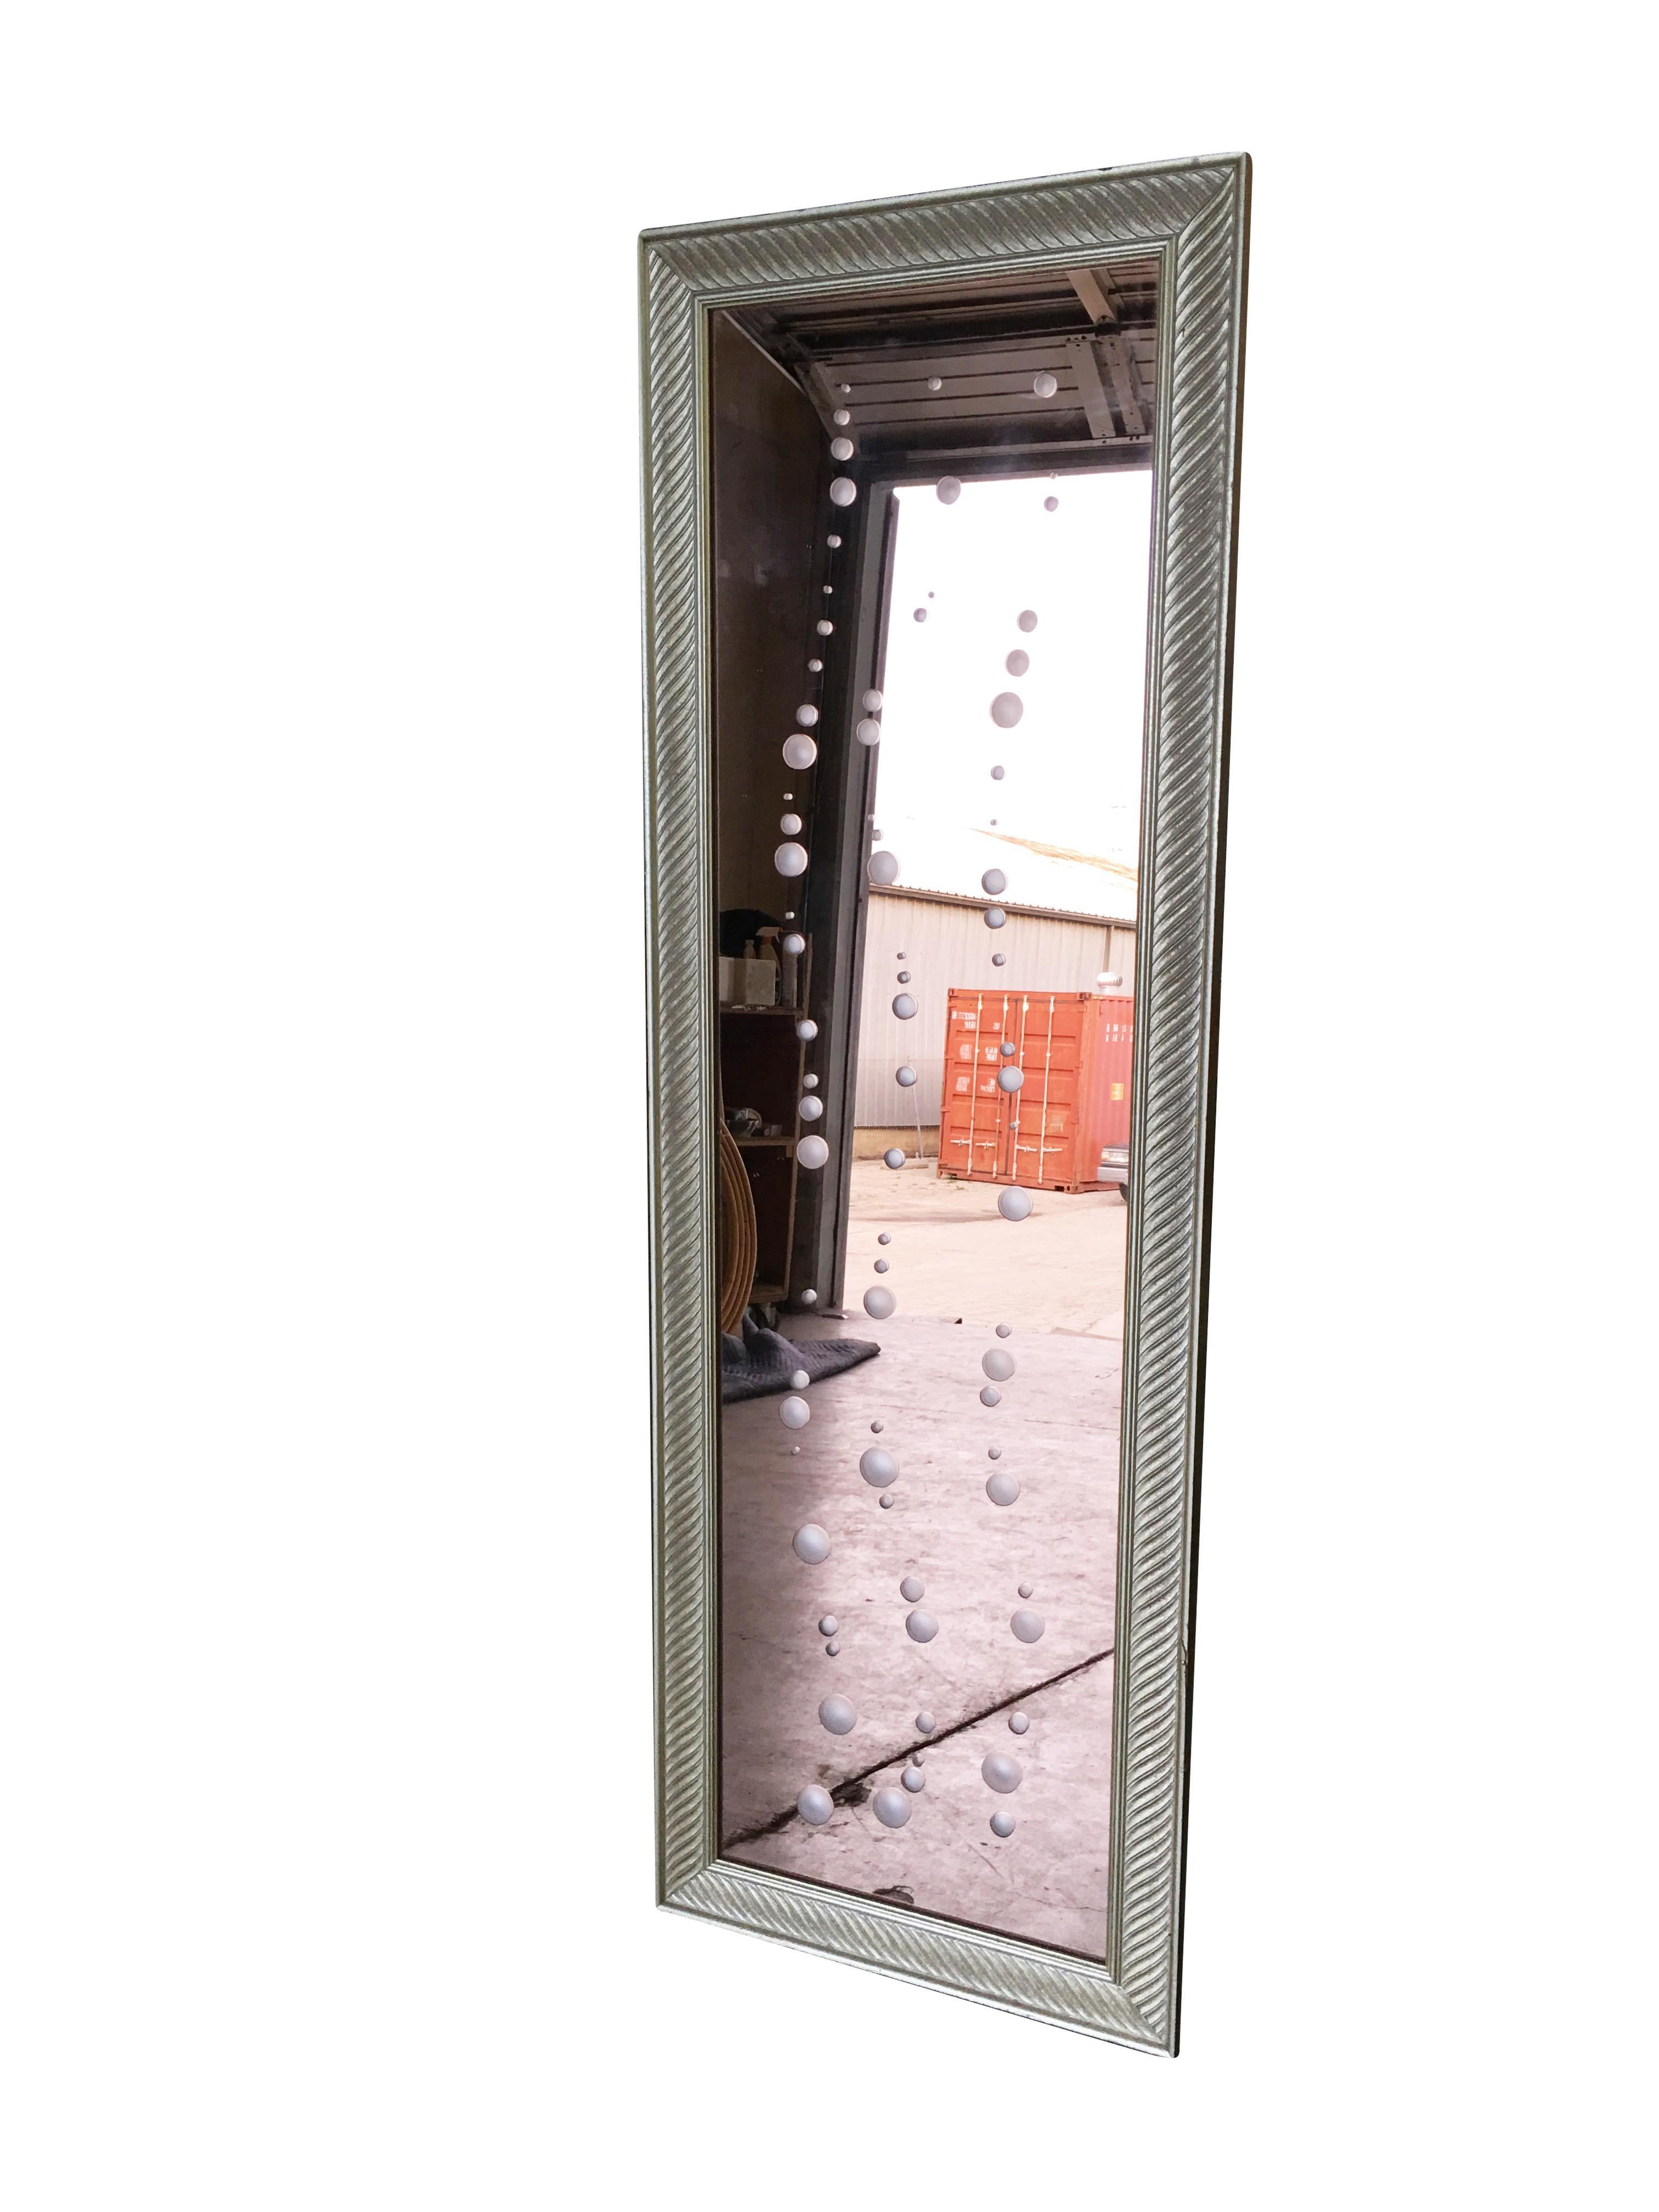 Vintage 1960s Regency Style Peach Glass Floor Mirror with carved bubbles along the mirror's surface.

Dimensions: 42